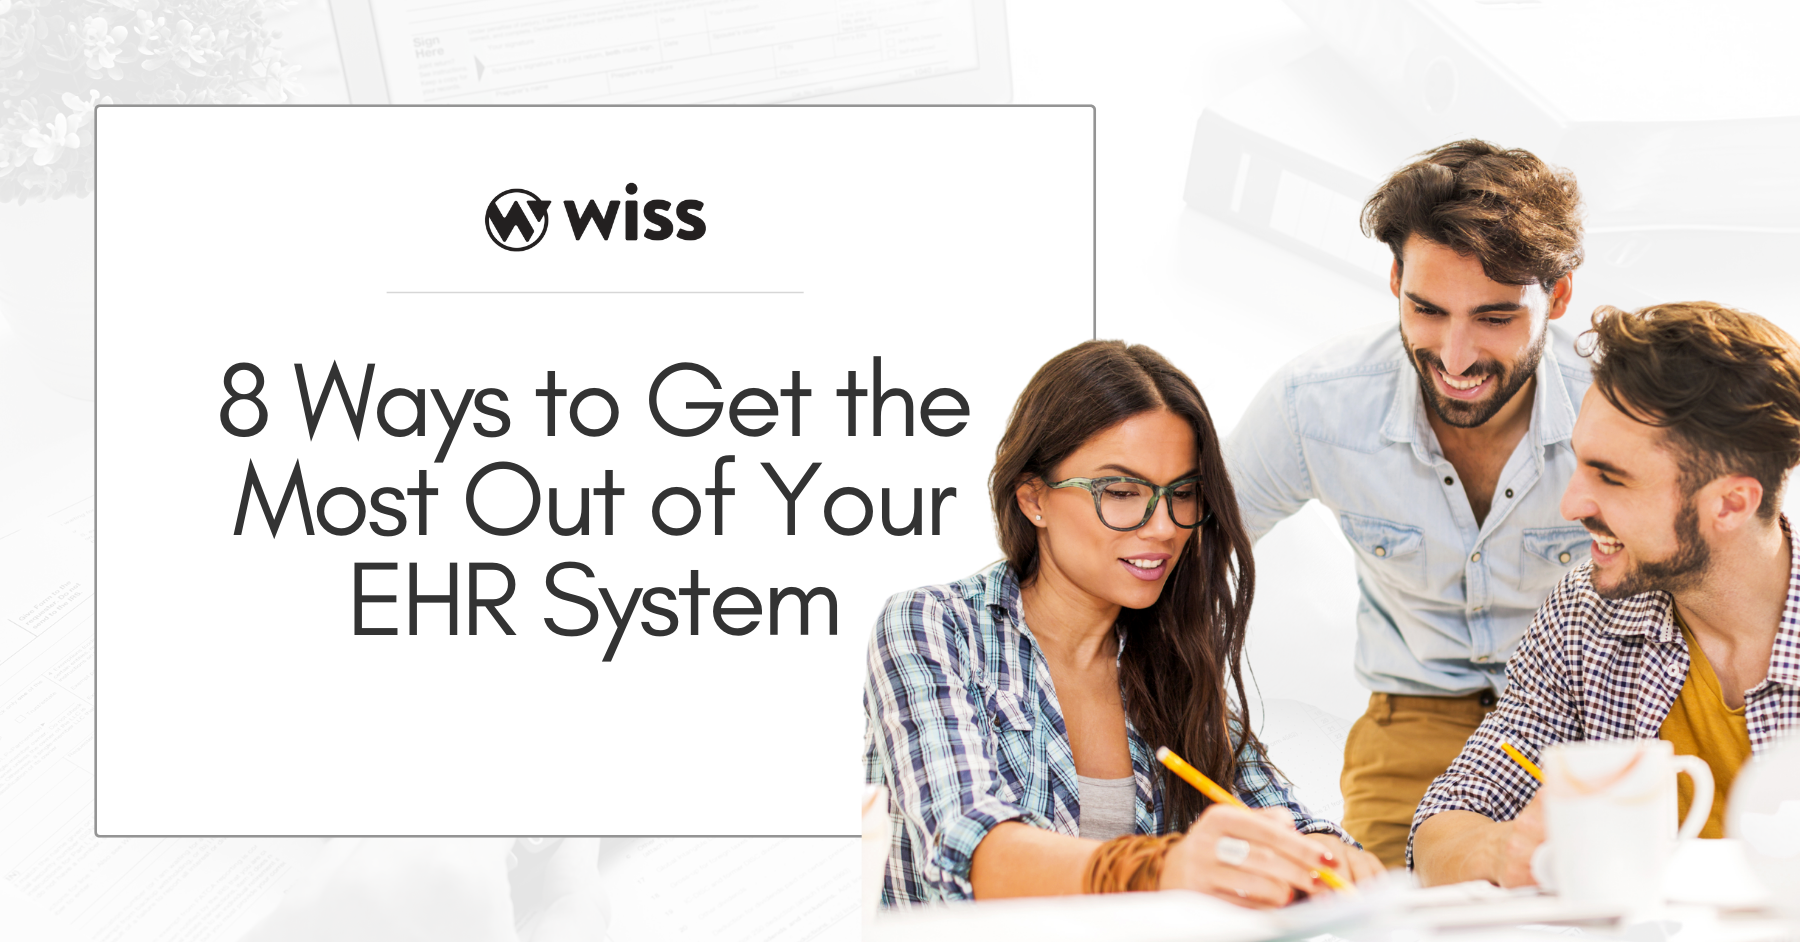 8 Ways to Get the Most Out of Your EHR System